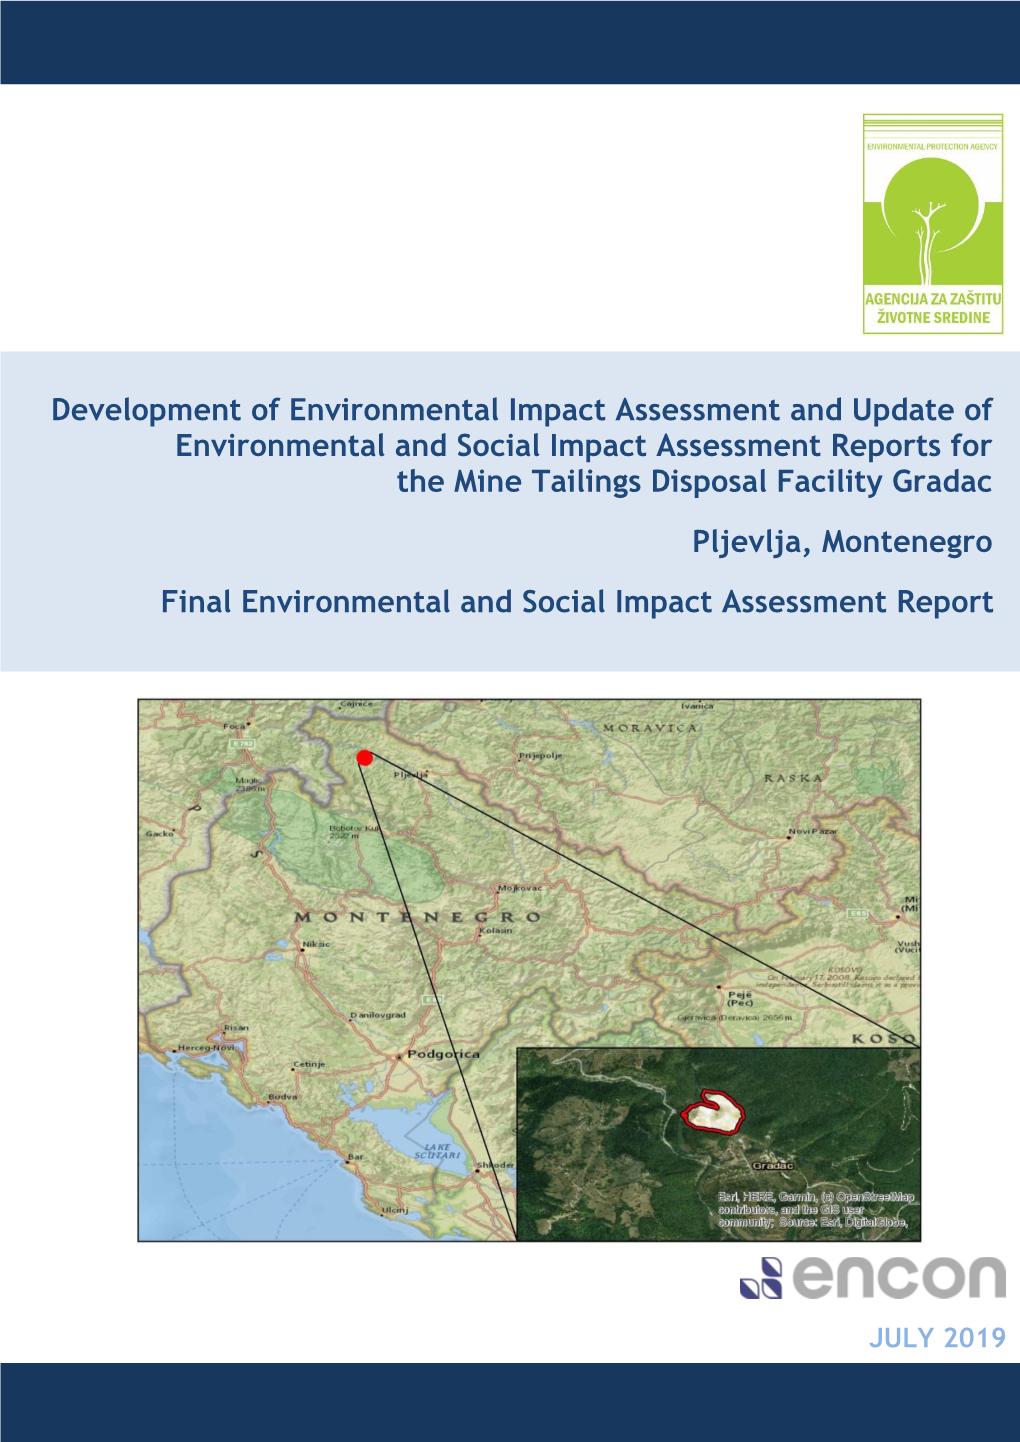 Development of Environmental Impact Assessment and Update of Environmental and Social Impact Assessment Reports For